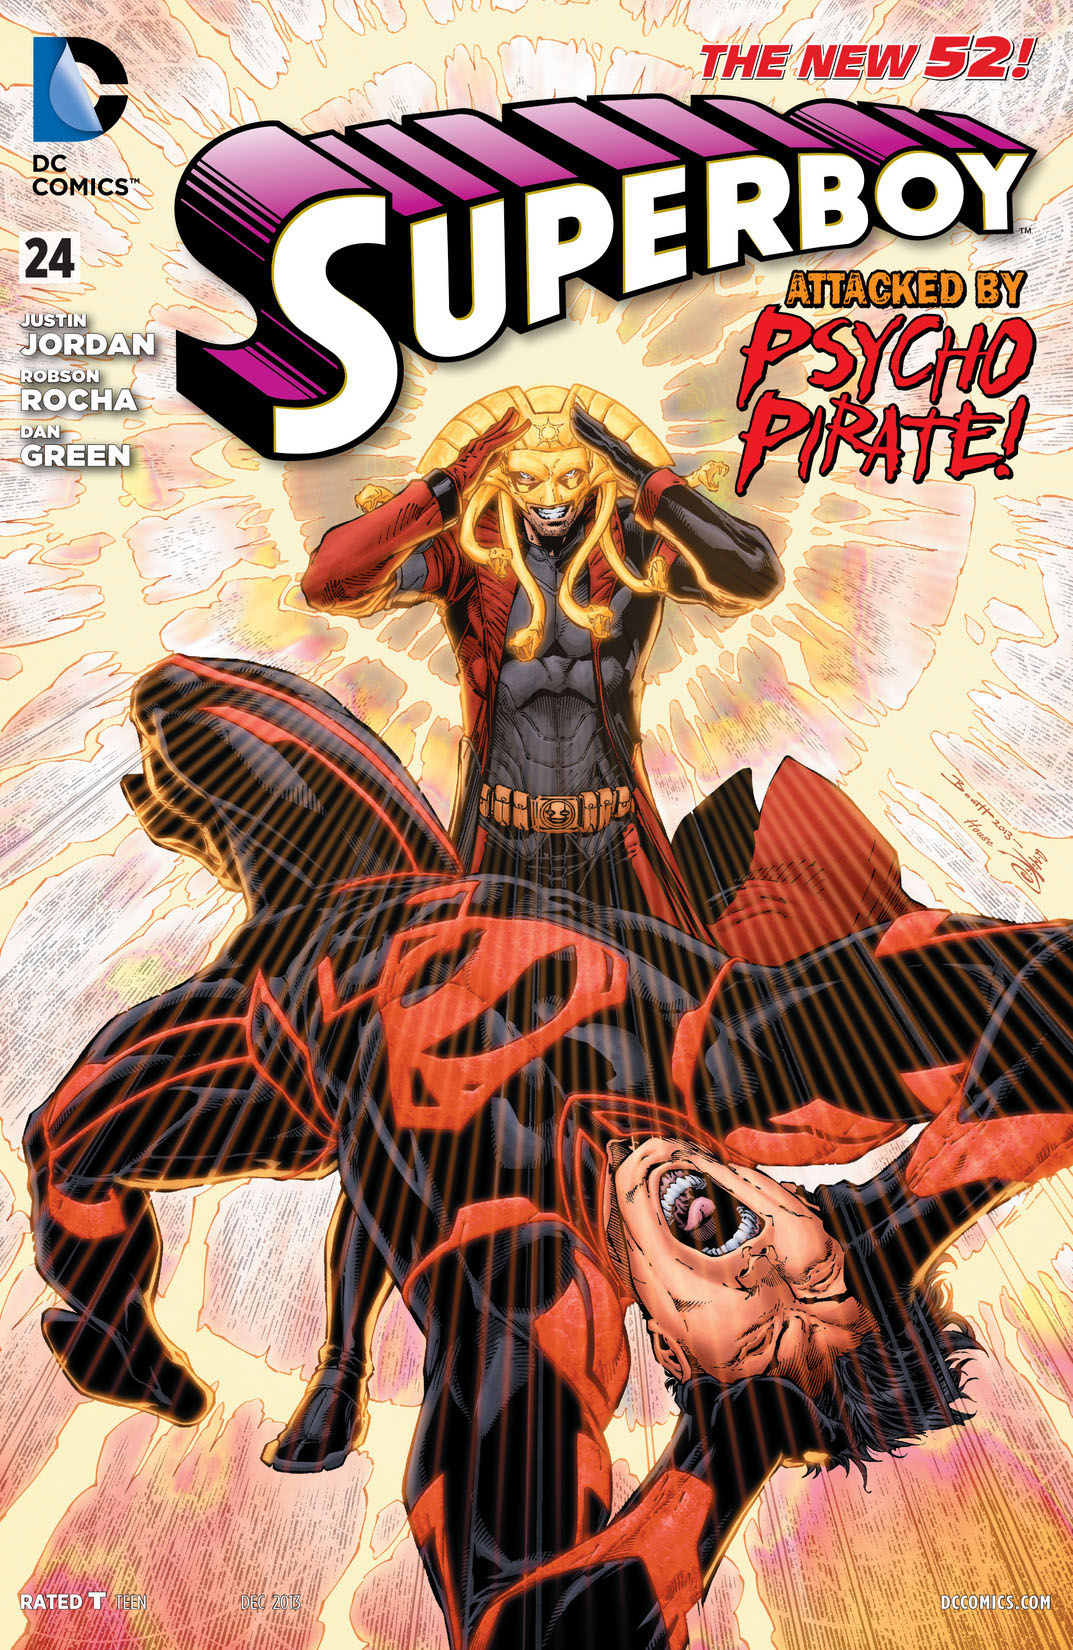 Superboy (2011-) #24 preview images